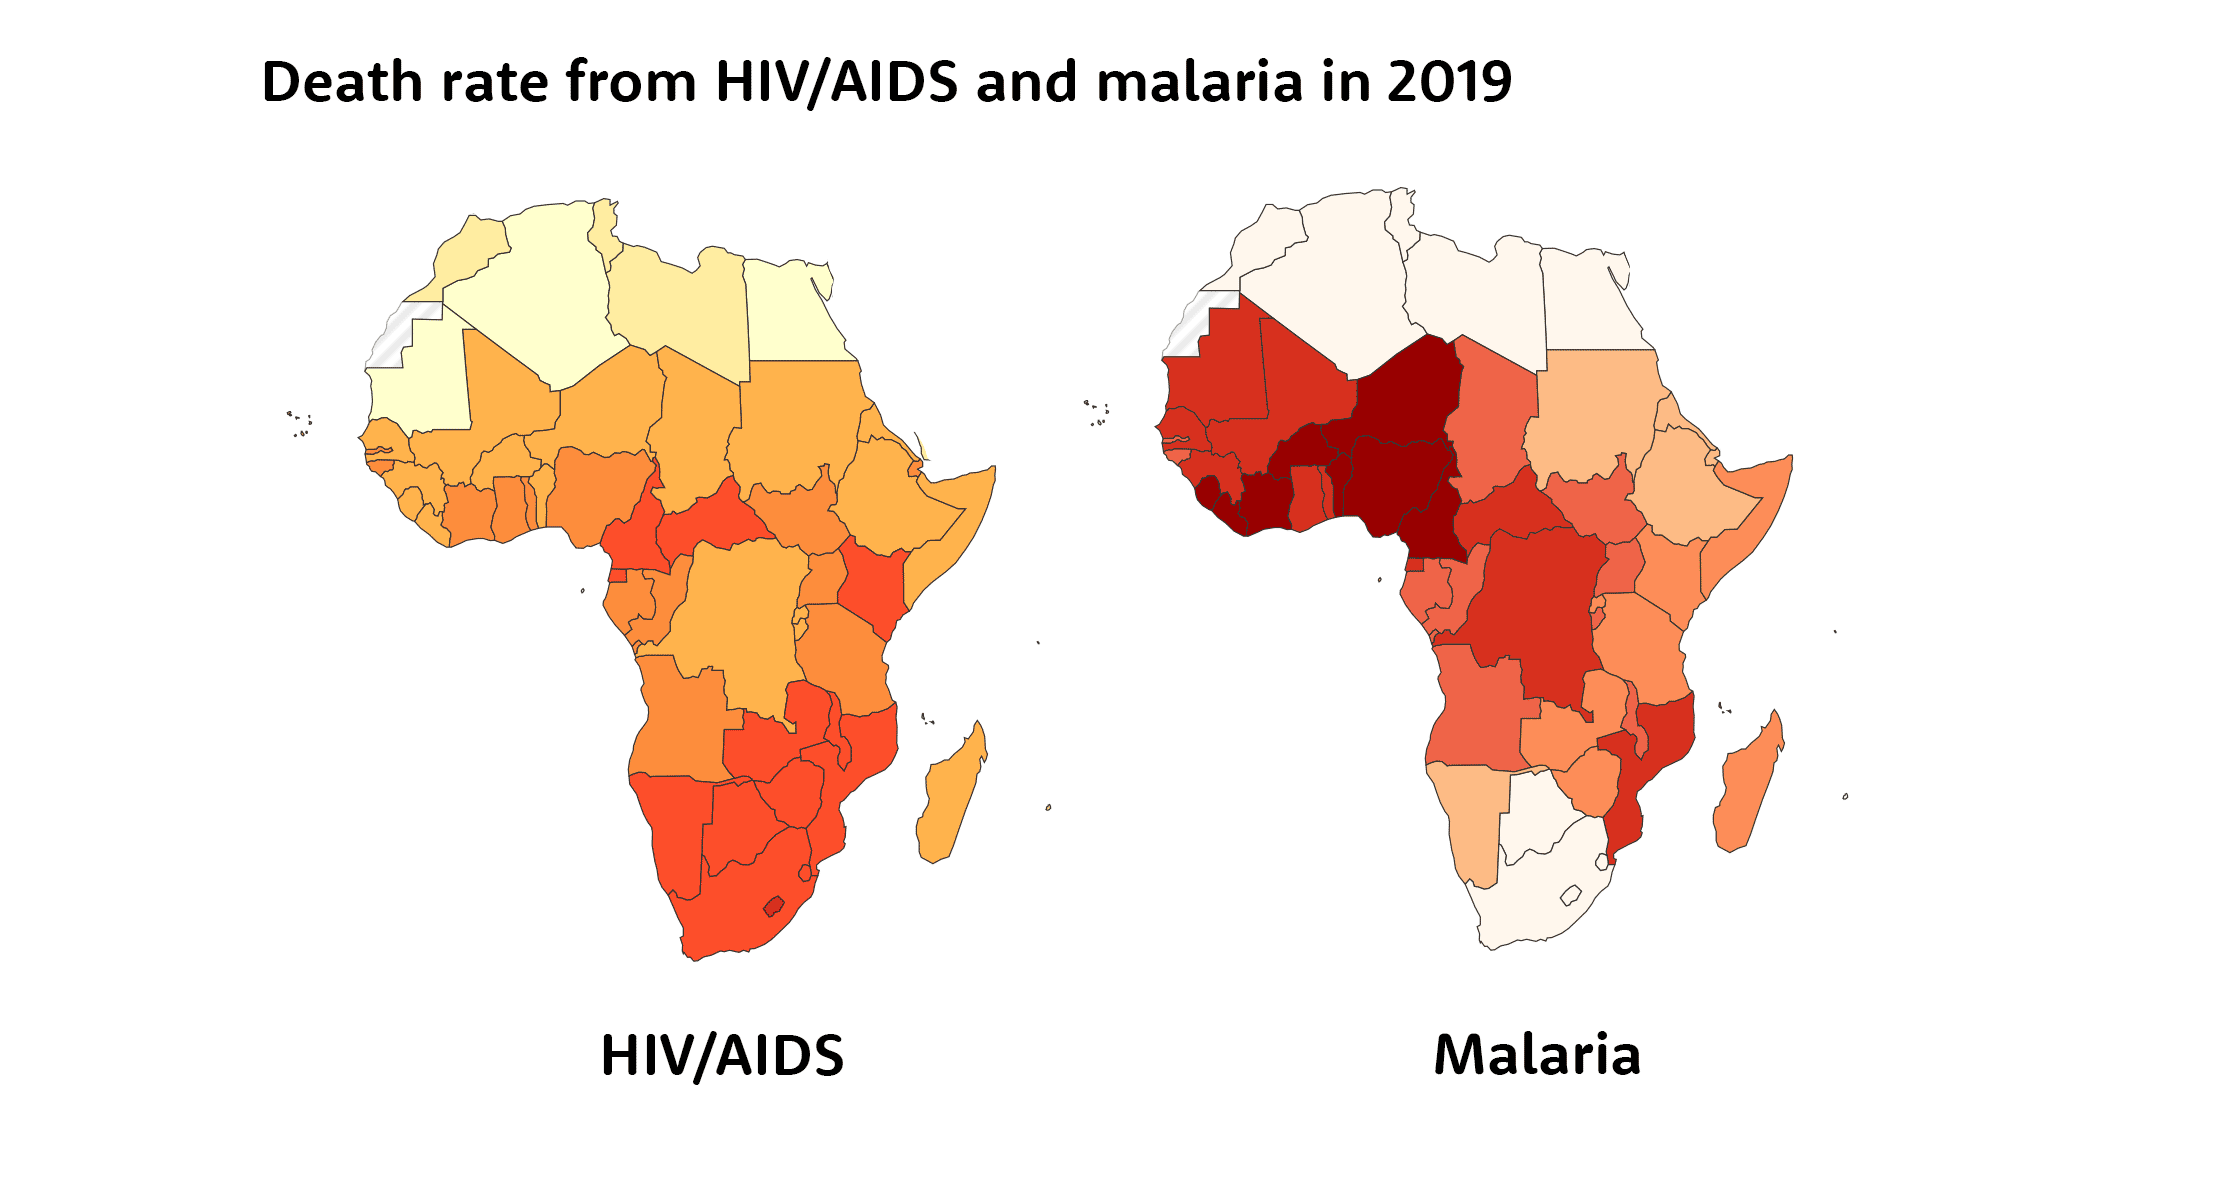 Two maps of Africa side by side, showing rates for each country for HIV/AIDS and malaria deaths in 2019. Maps are described in surrounding text.